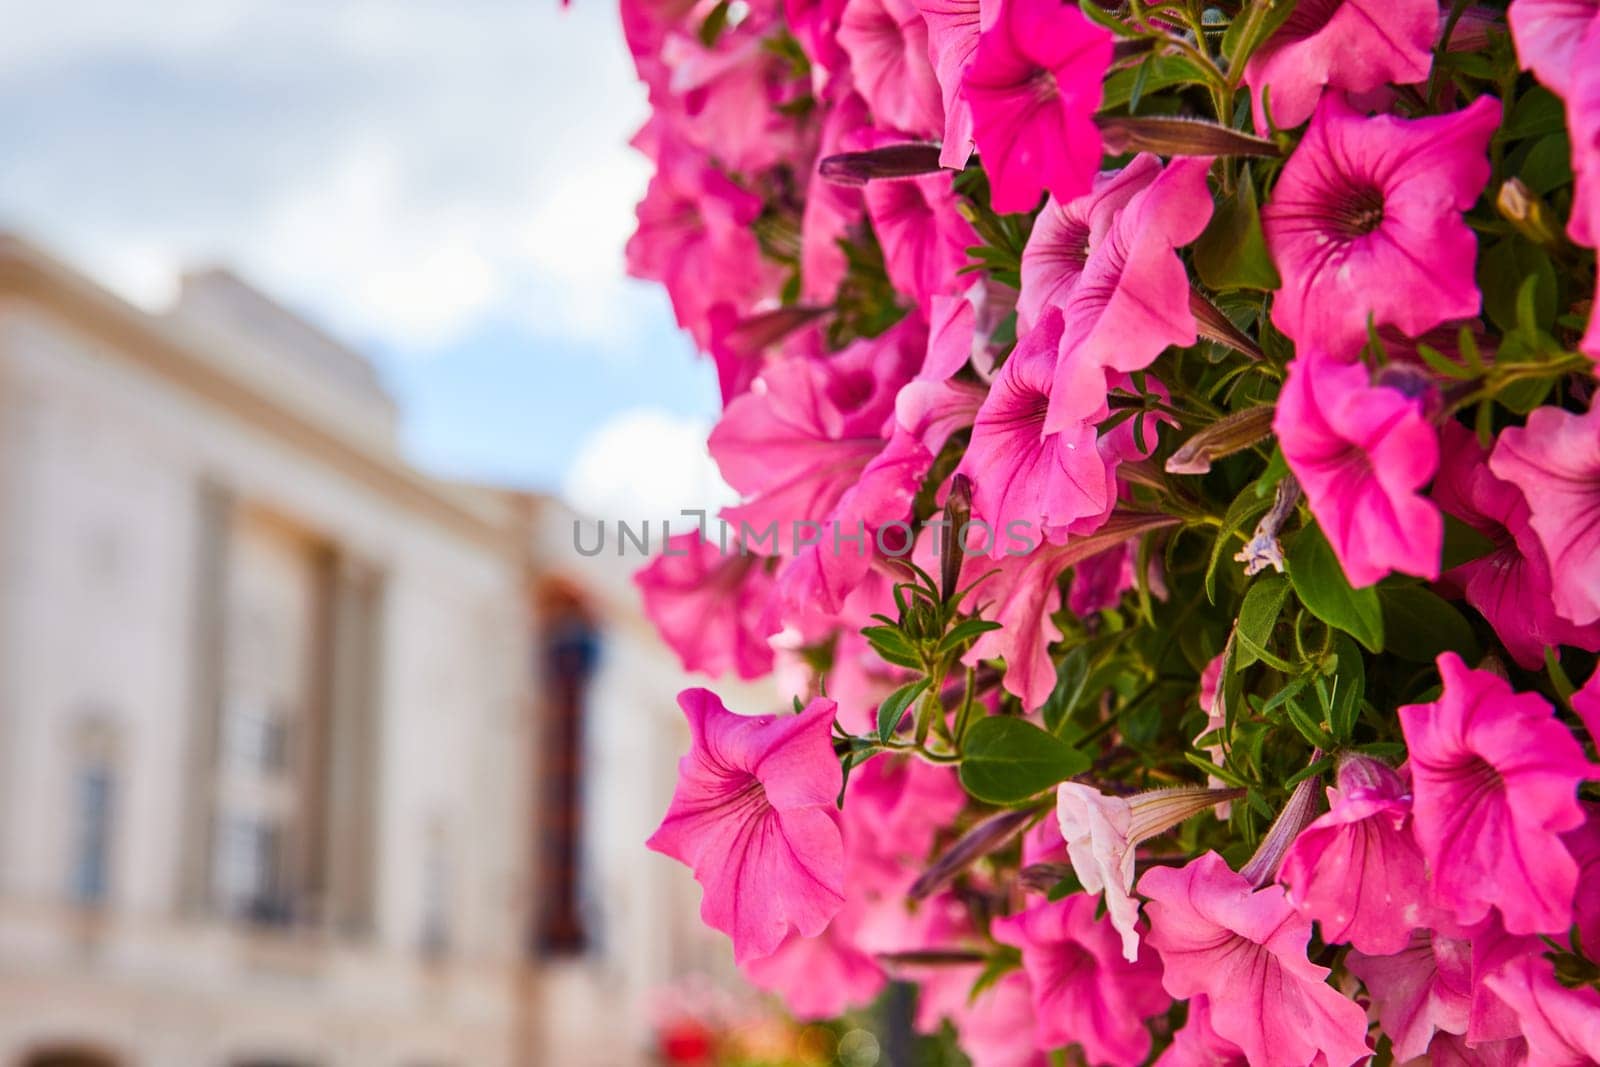 Vibrant Pink Petunias in Urban Setting, Eye-Level Perspective by njproductions